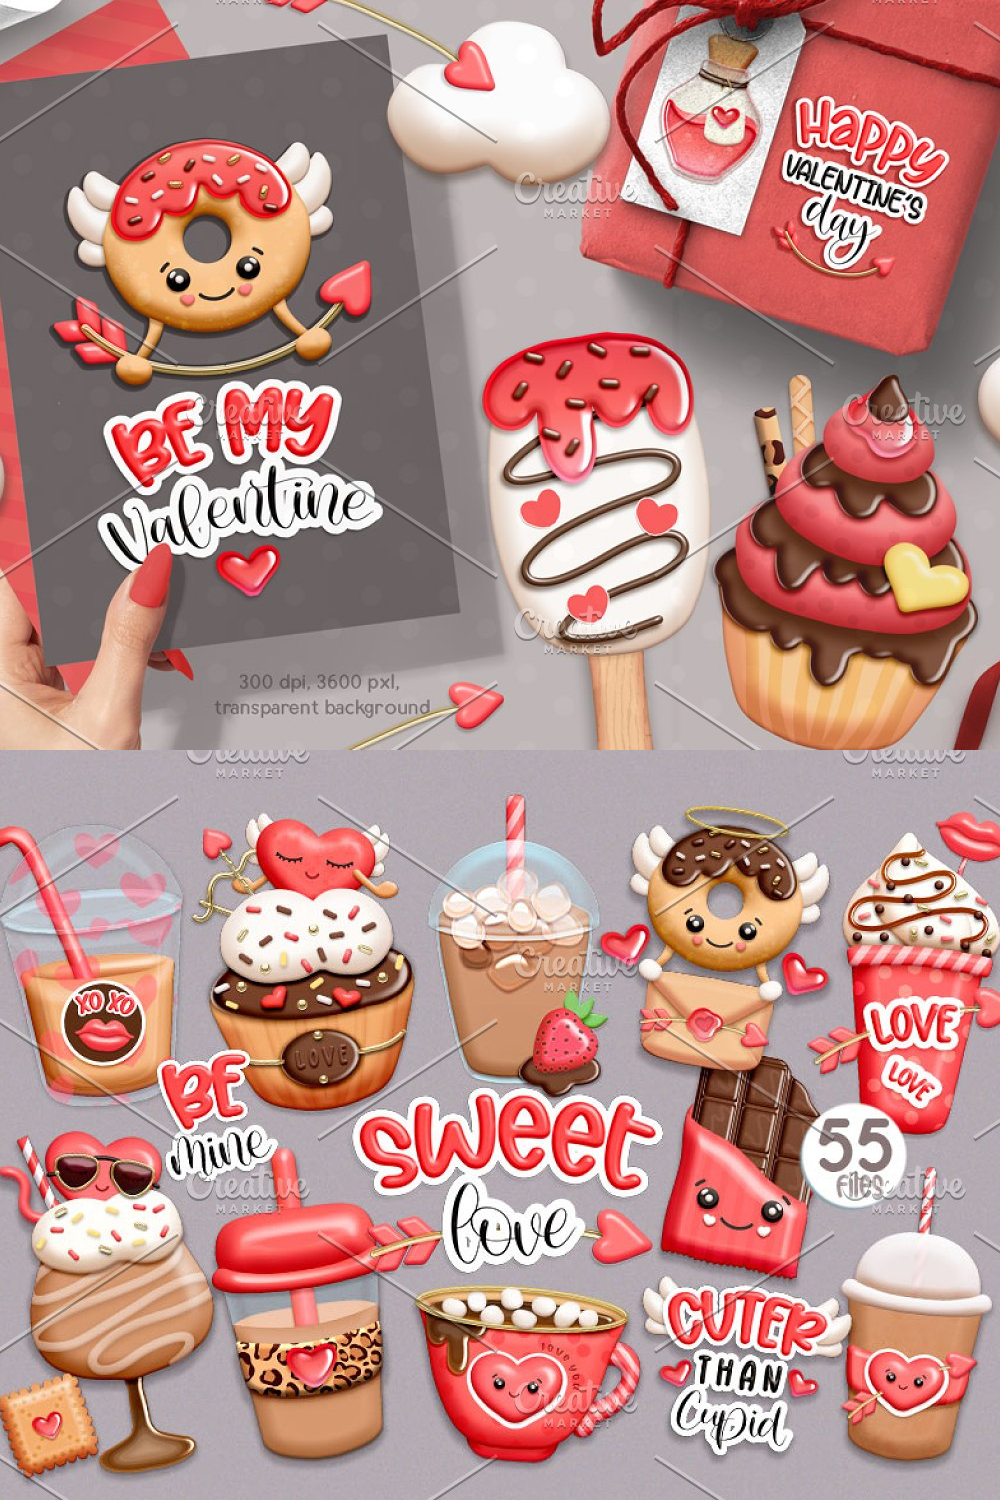 Illustrations happy valentines day collection of pinterest.